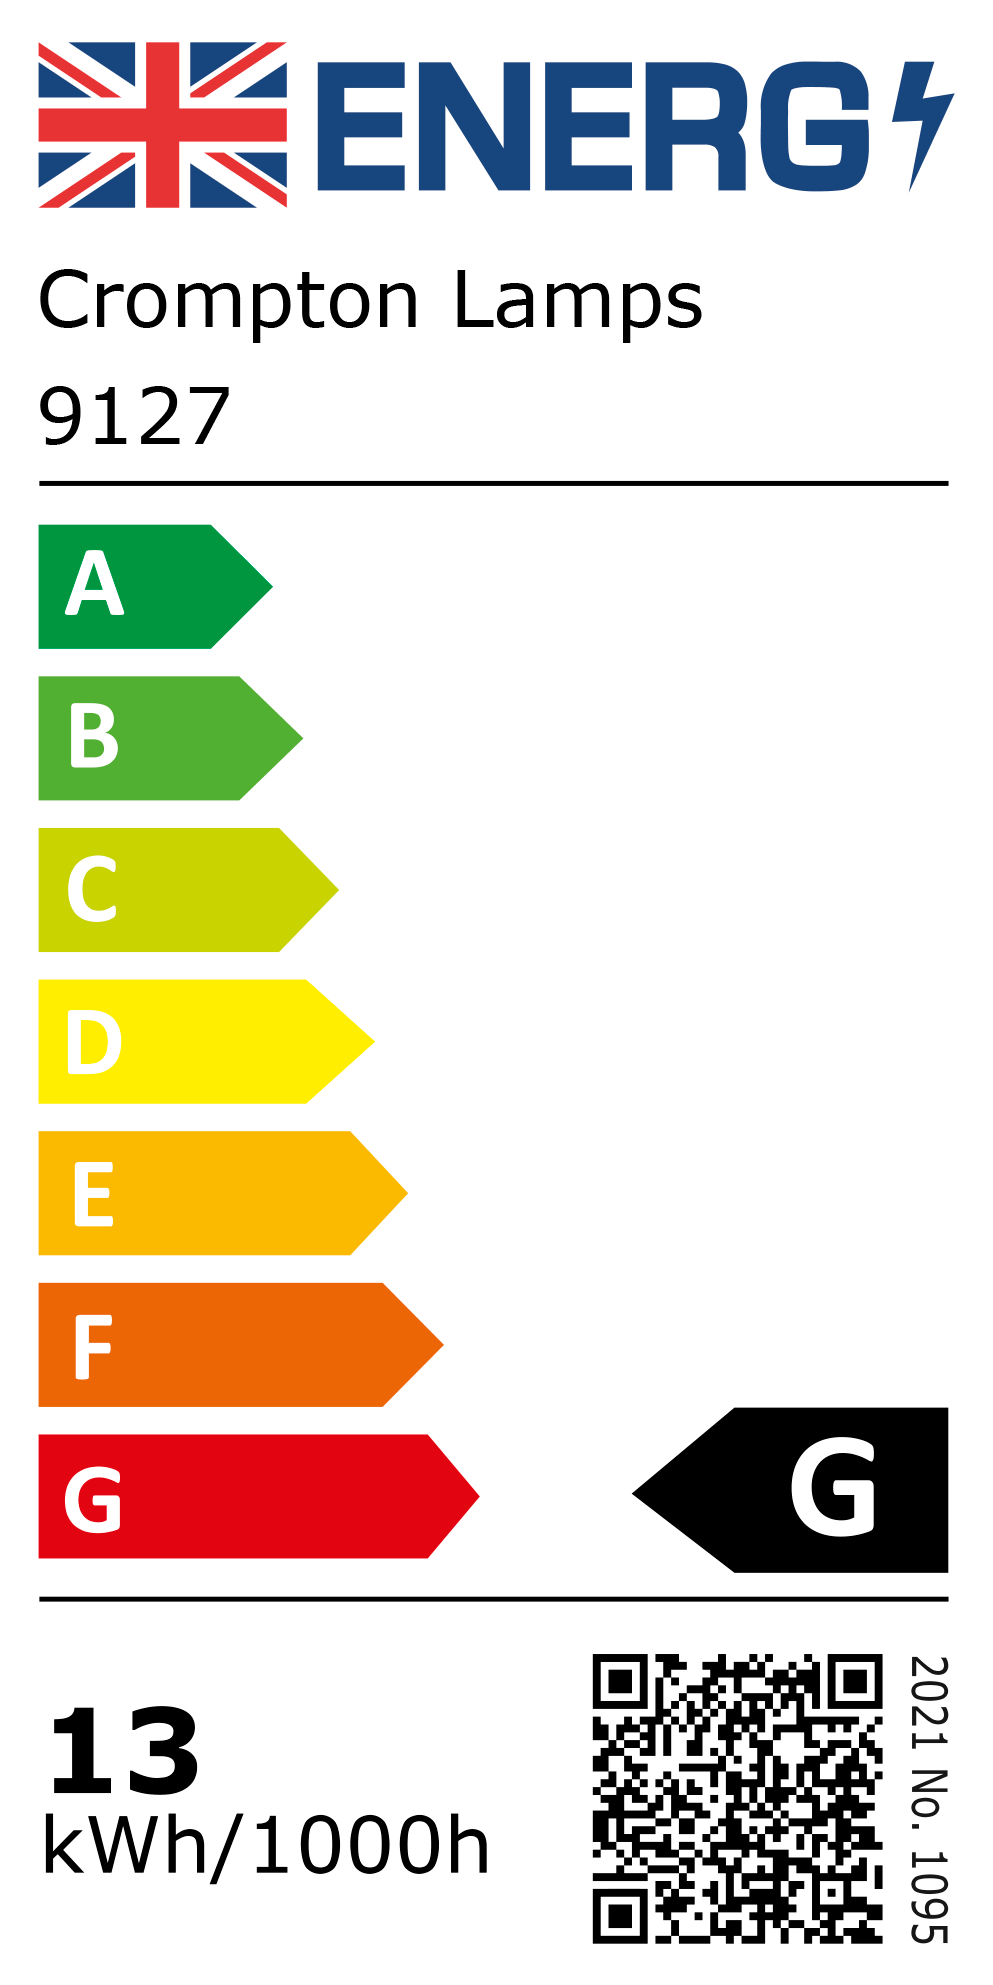 New 2021 Energy Rating Label: Stock Code 9127